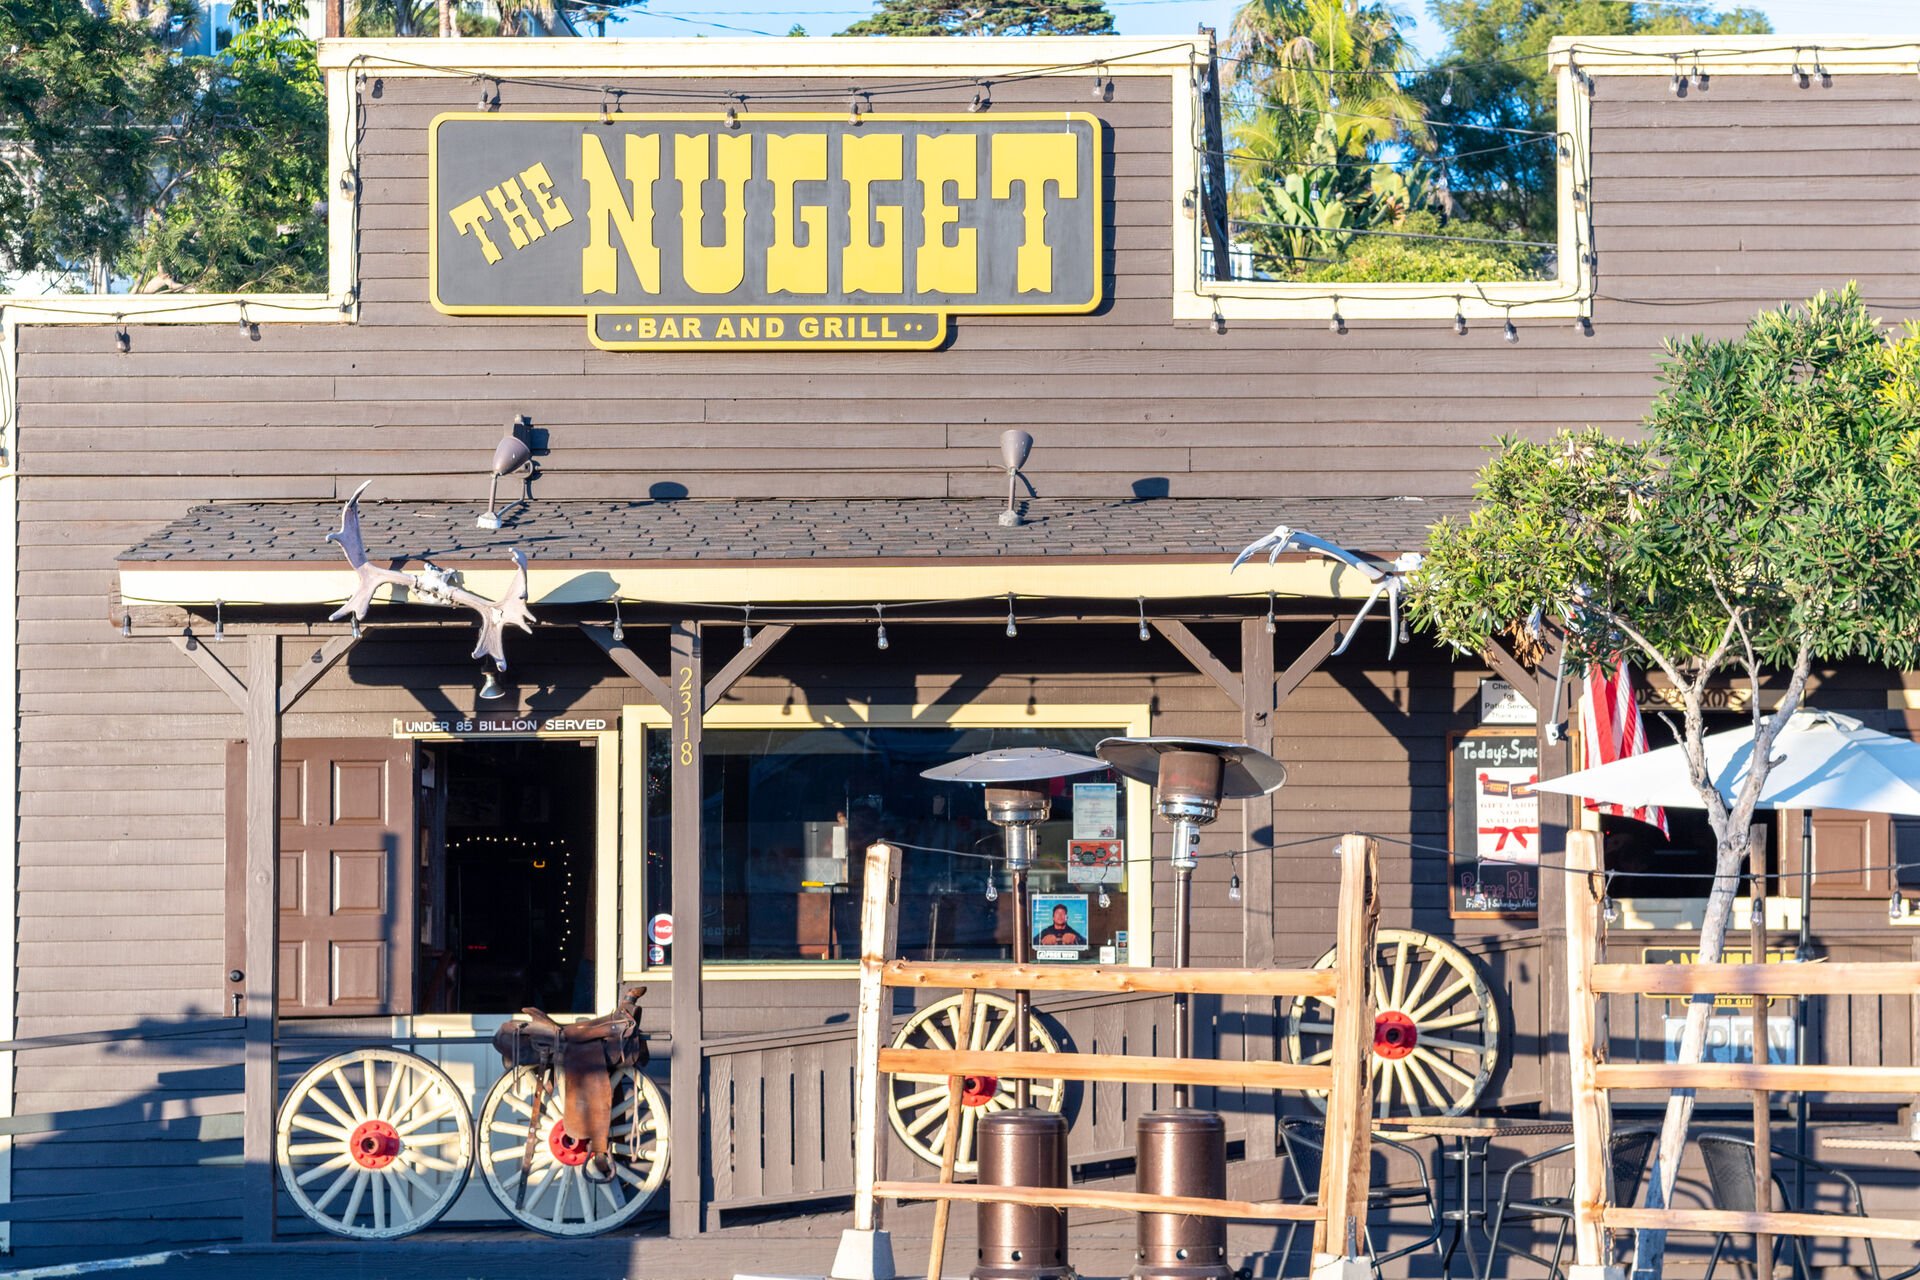 The Nugget is so close to the condo, right next door.